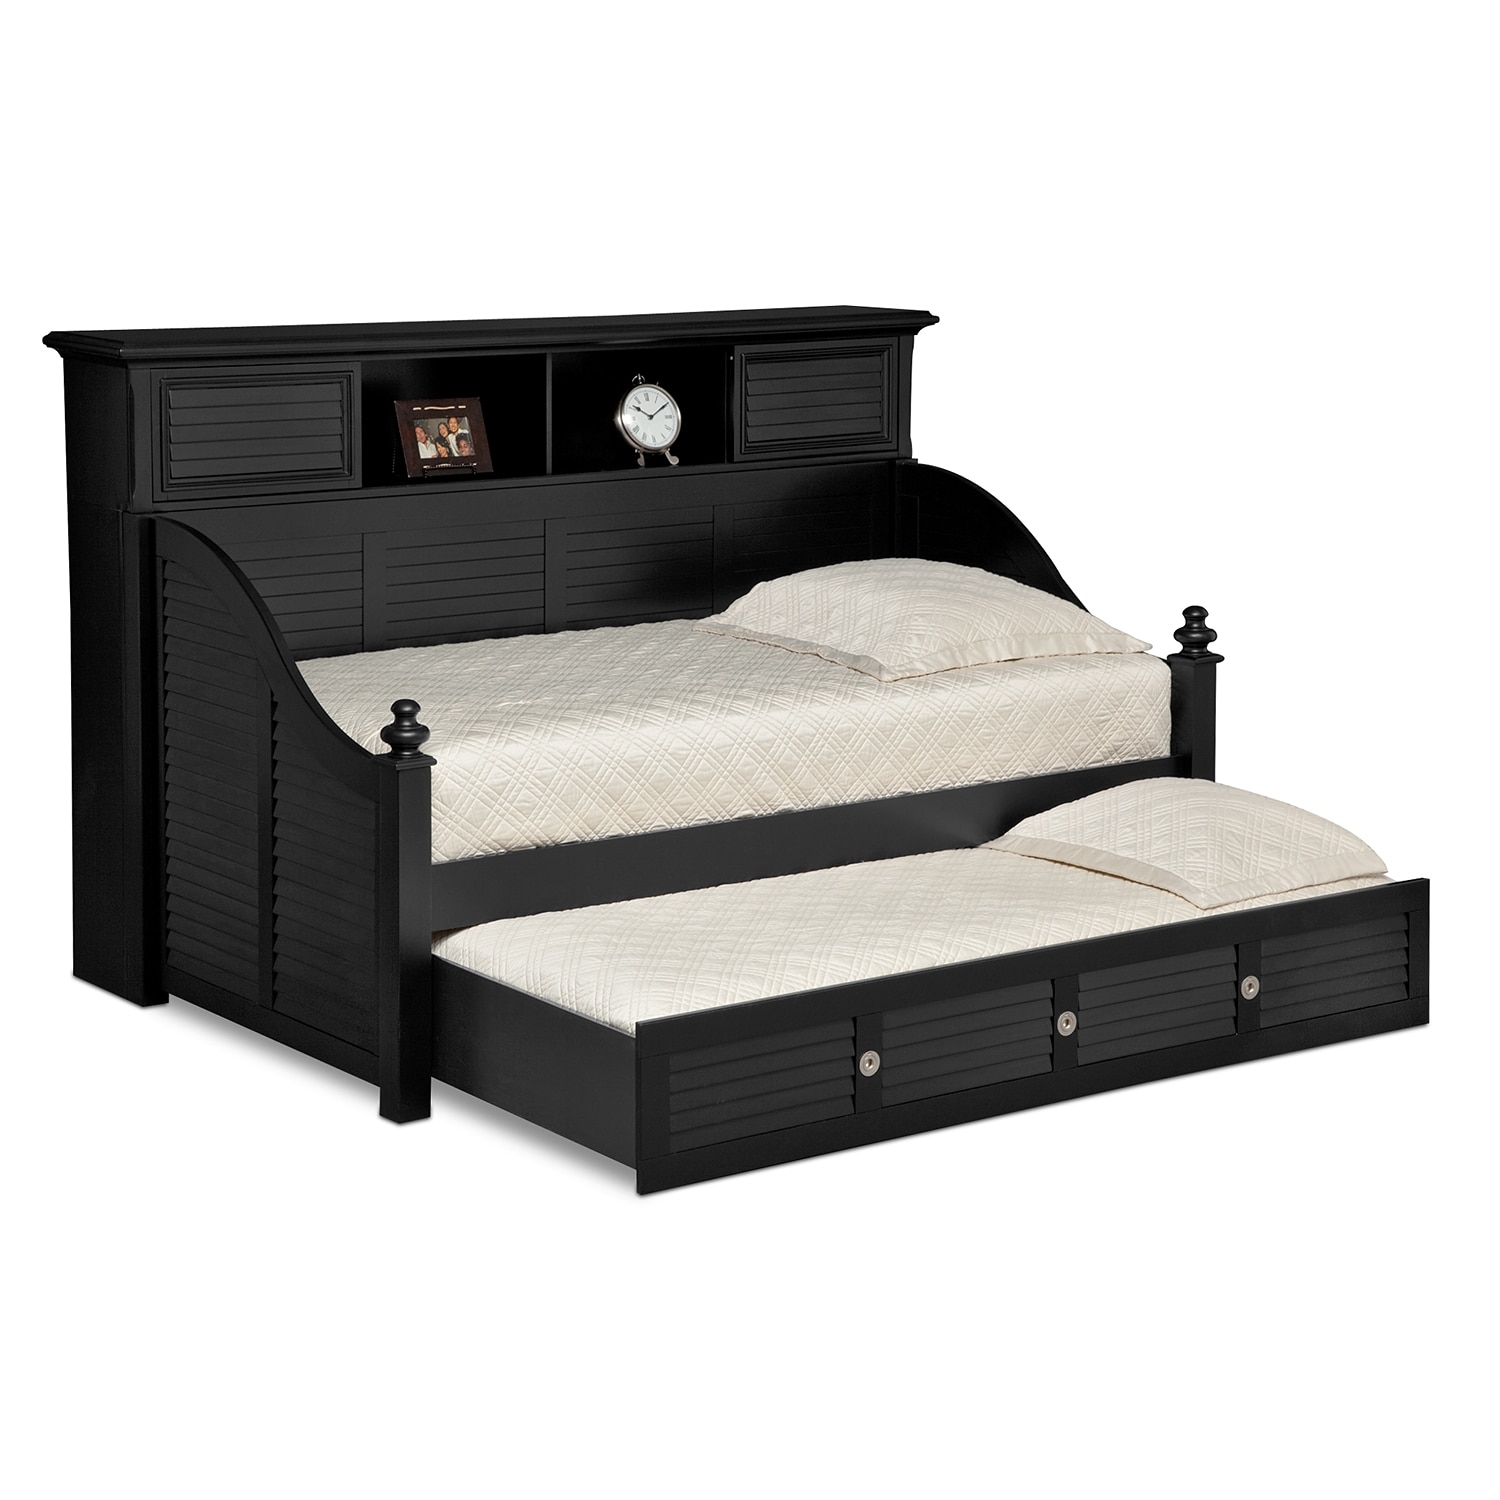 Black Wood Daybed - Sears